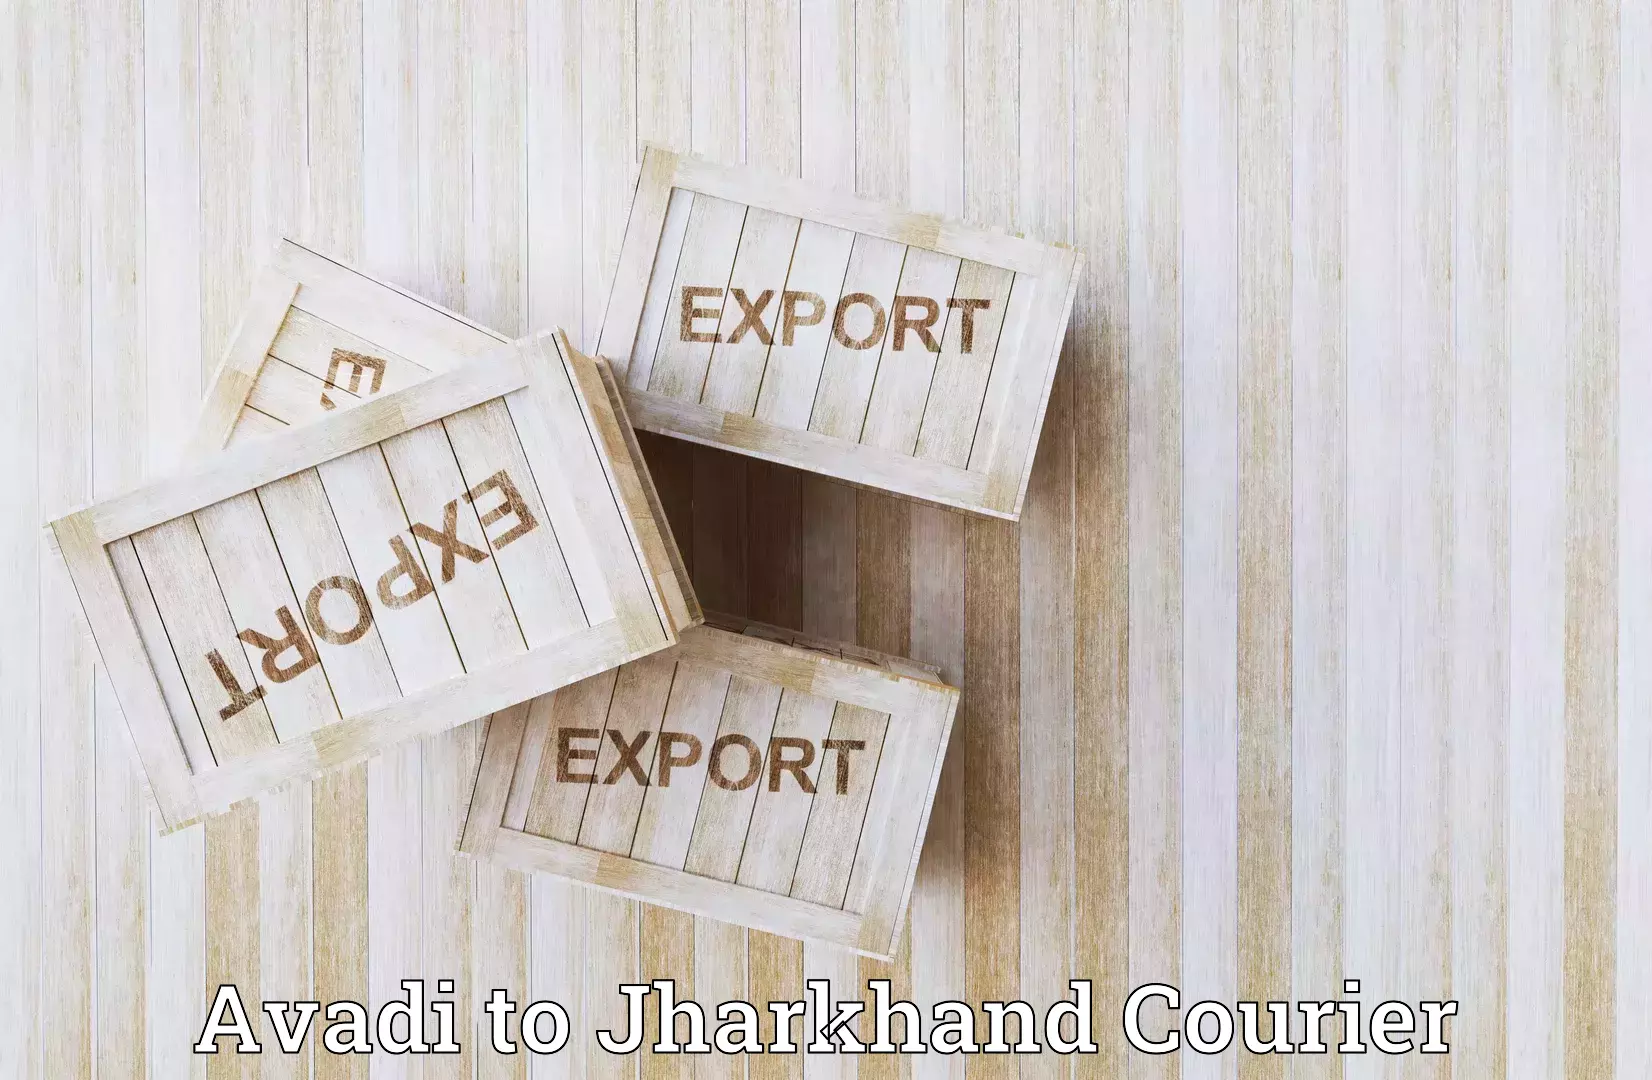 Courier rate comparison Avadi to Jharkhand